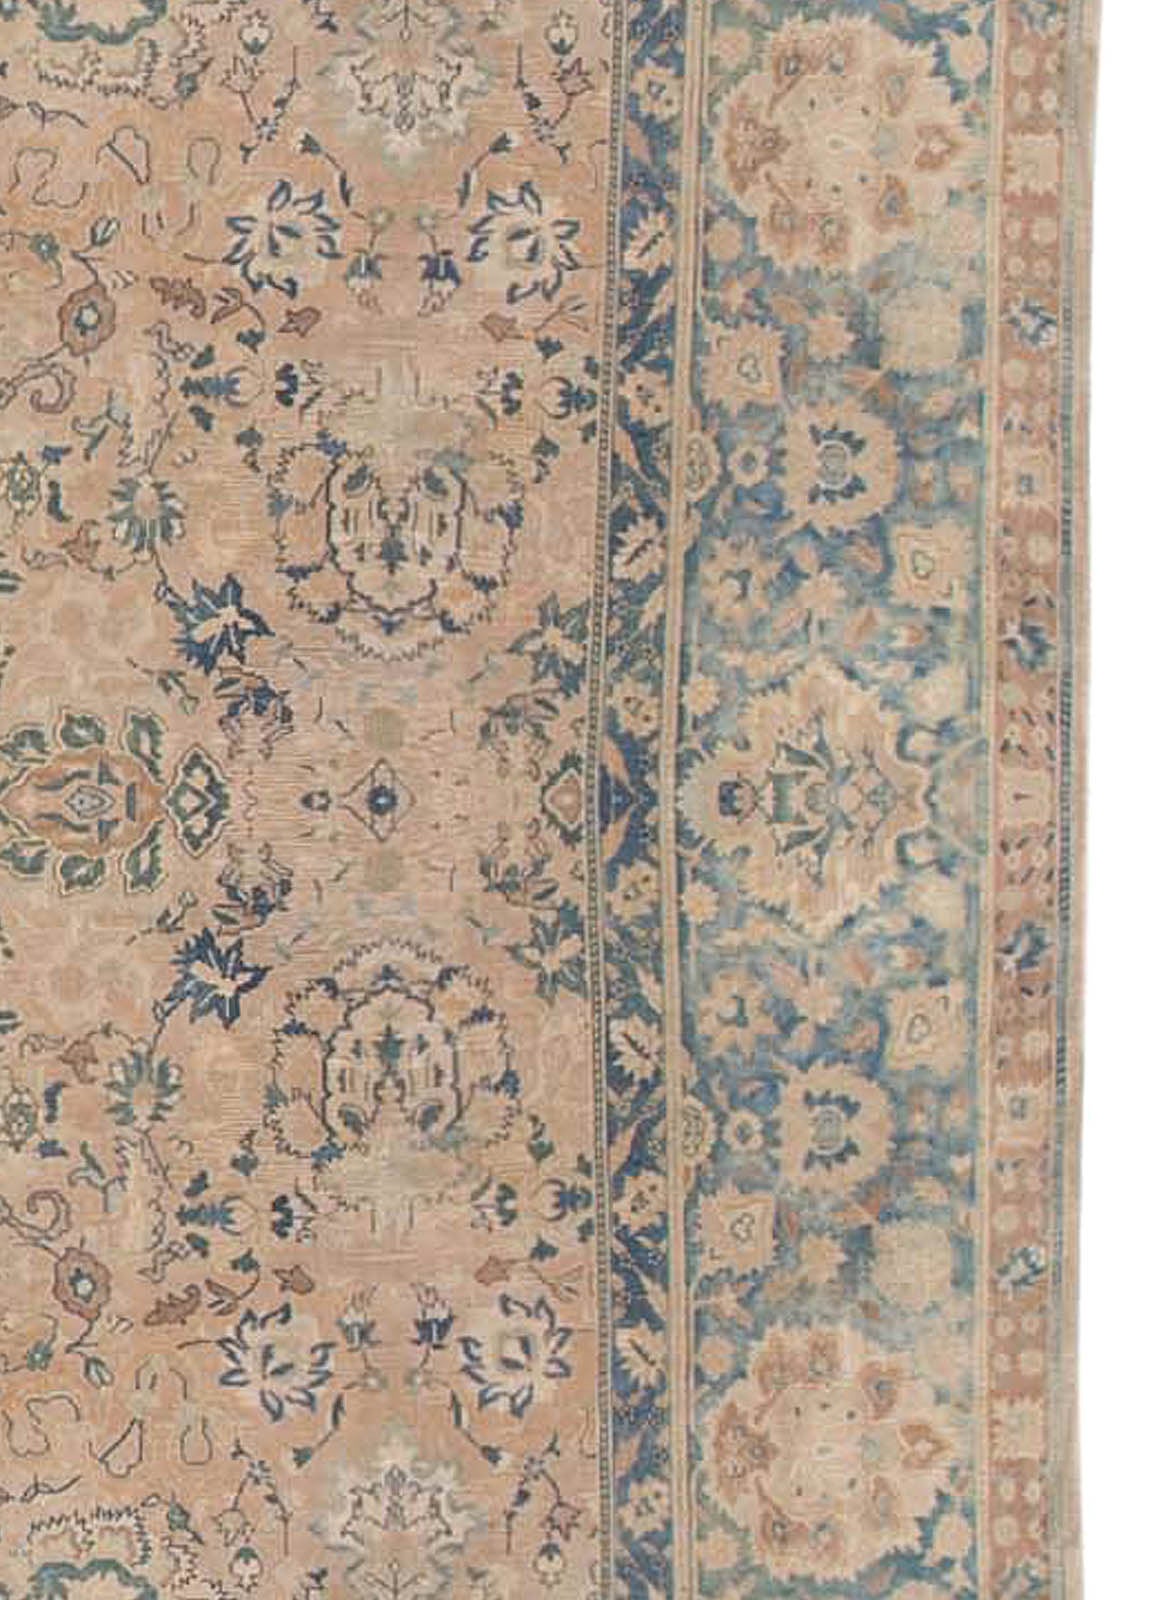 Antique North Indian Botanic Handmade Wool Rug In Good Condition For Sale In New York, NY